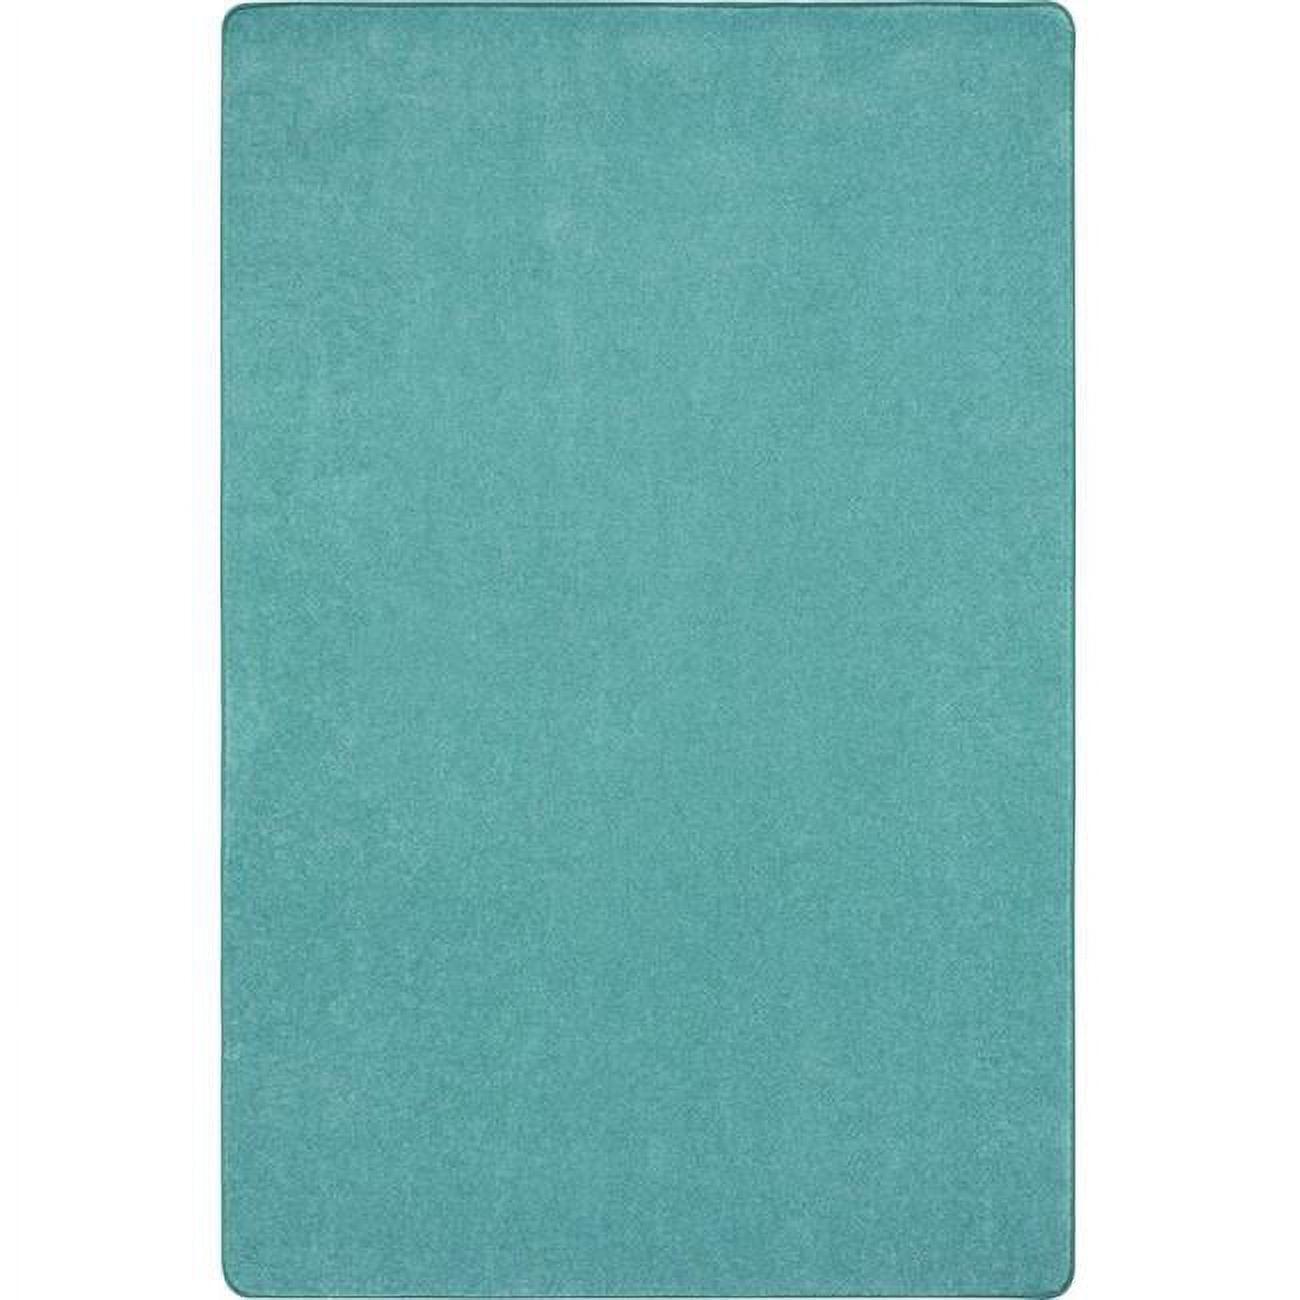 Seafoam Serenity 12'x7'6" Tufted Synthetic Kids Area Rug